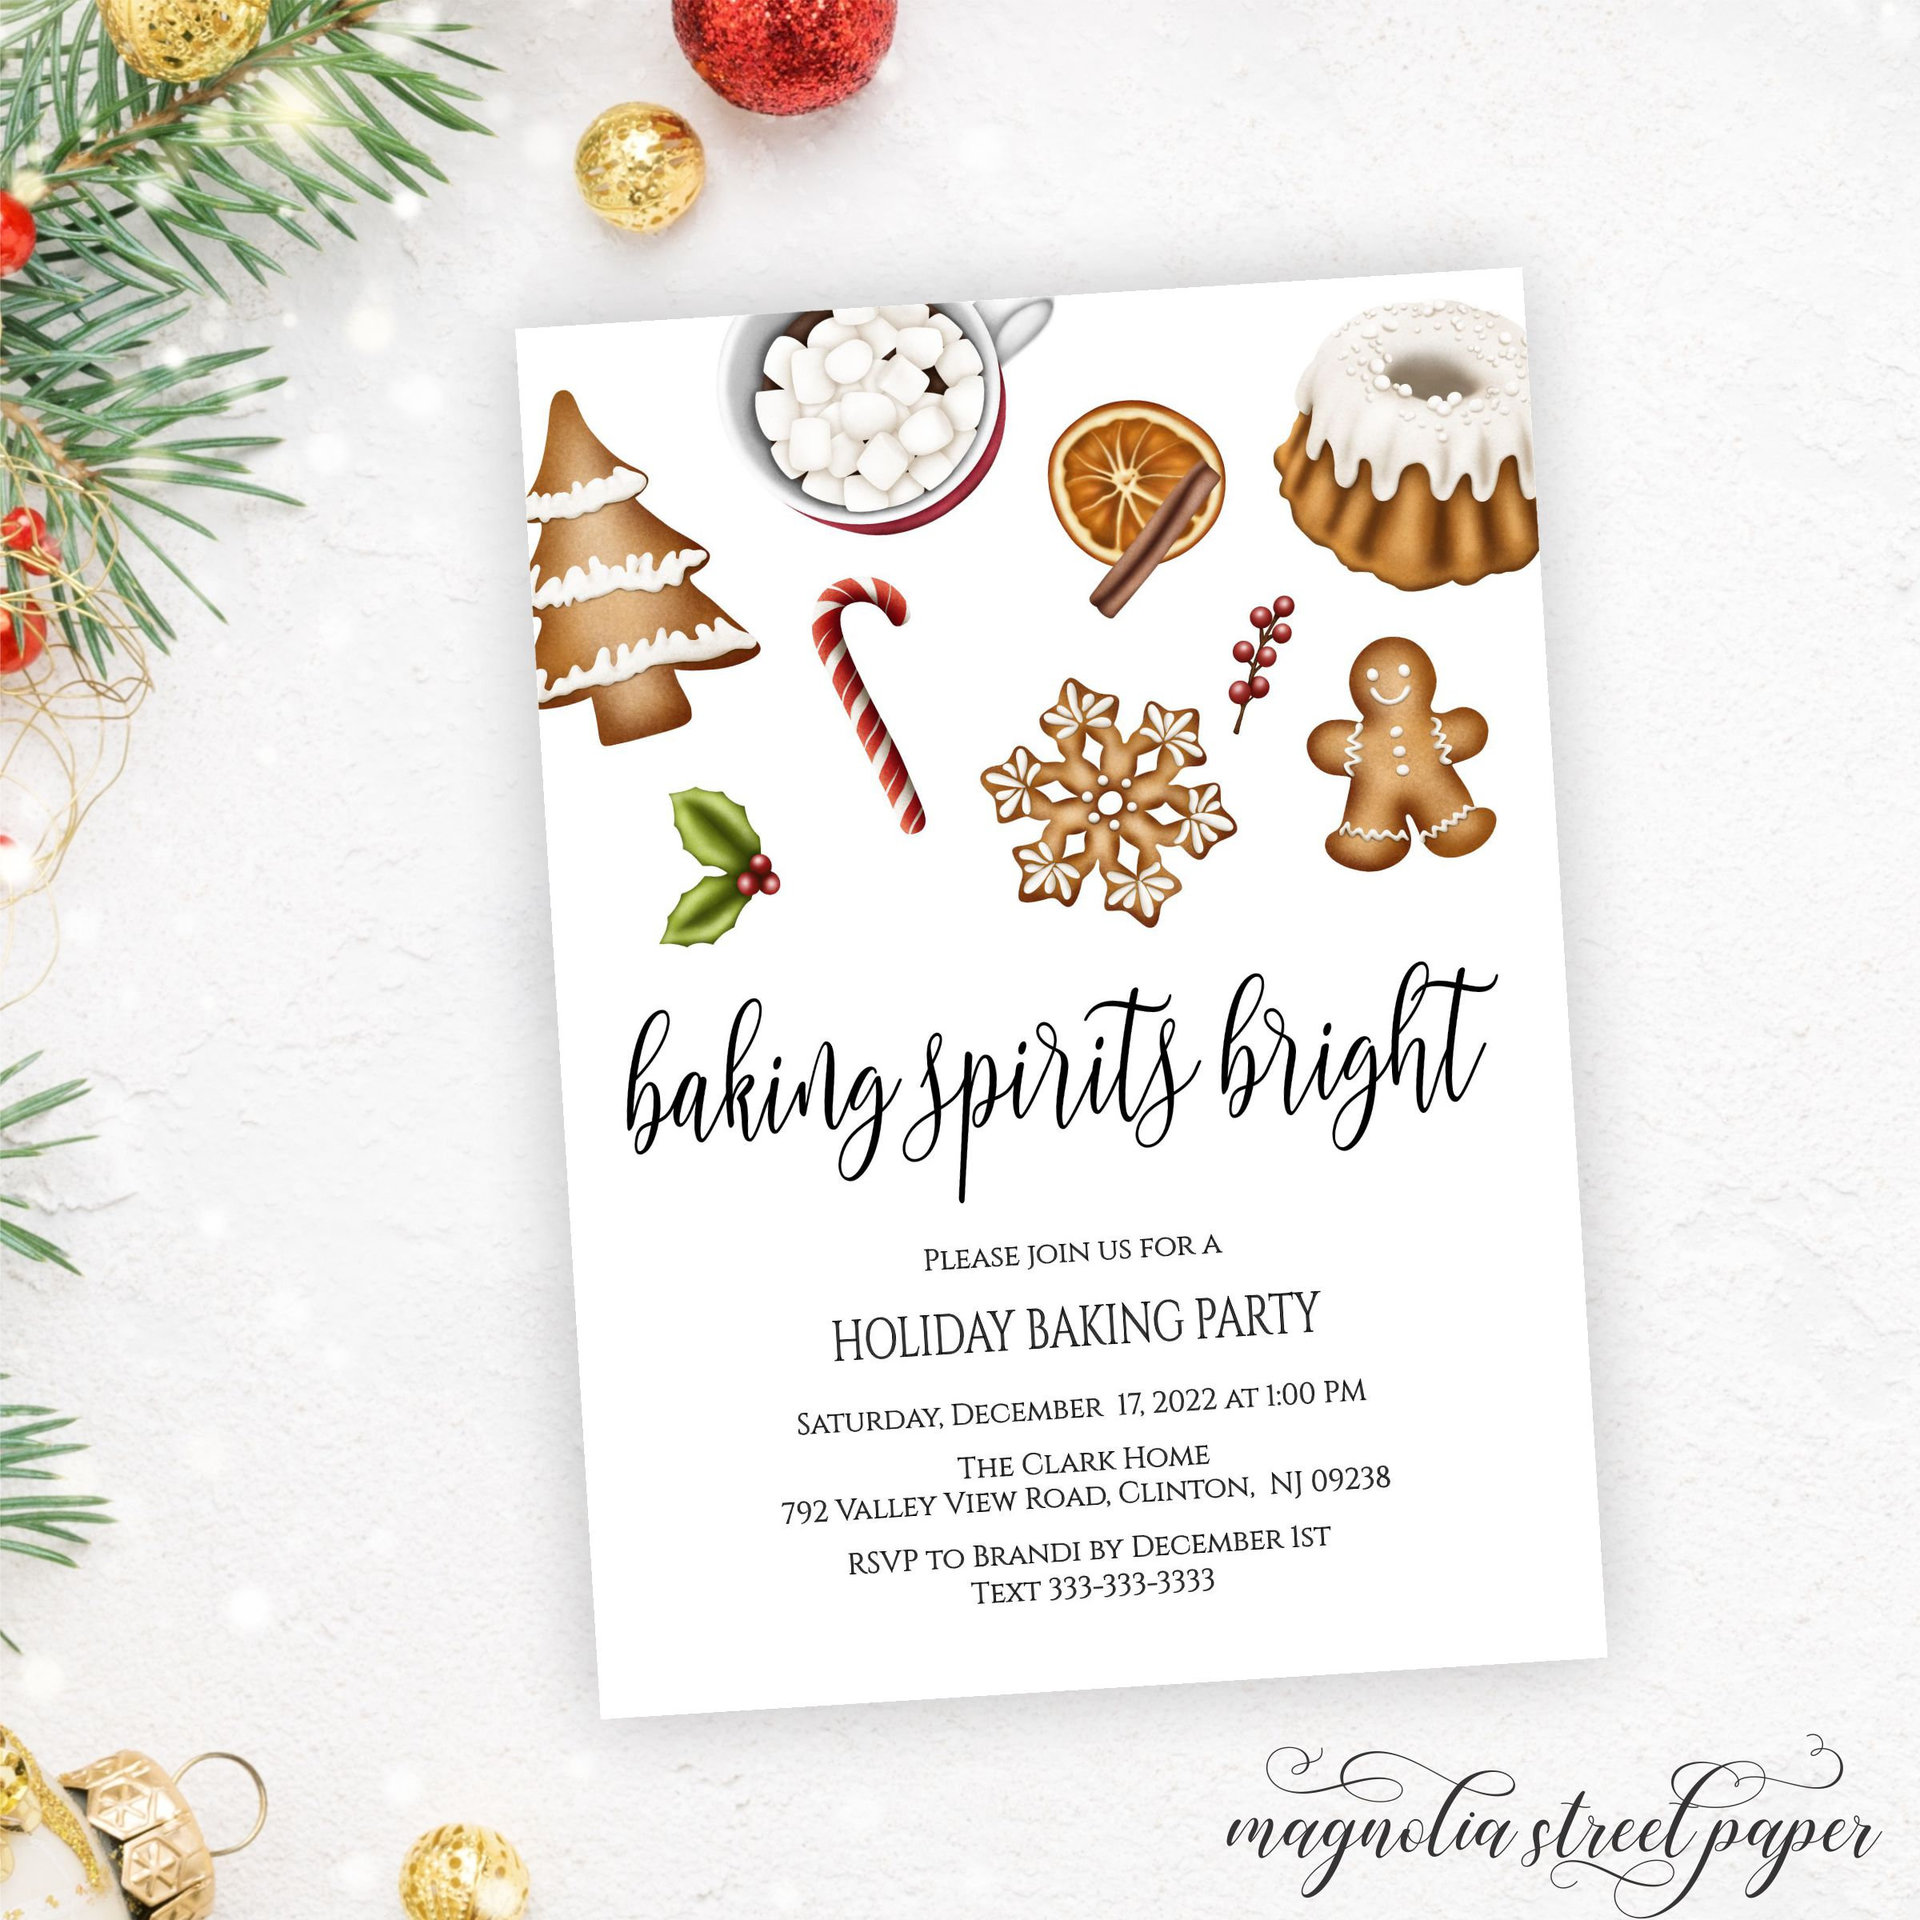 Baking Spirits Bright Party Invitation, Cookie Exchange Party